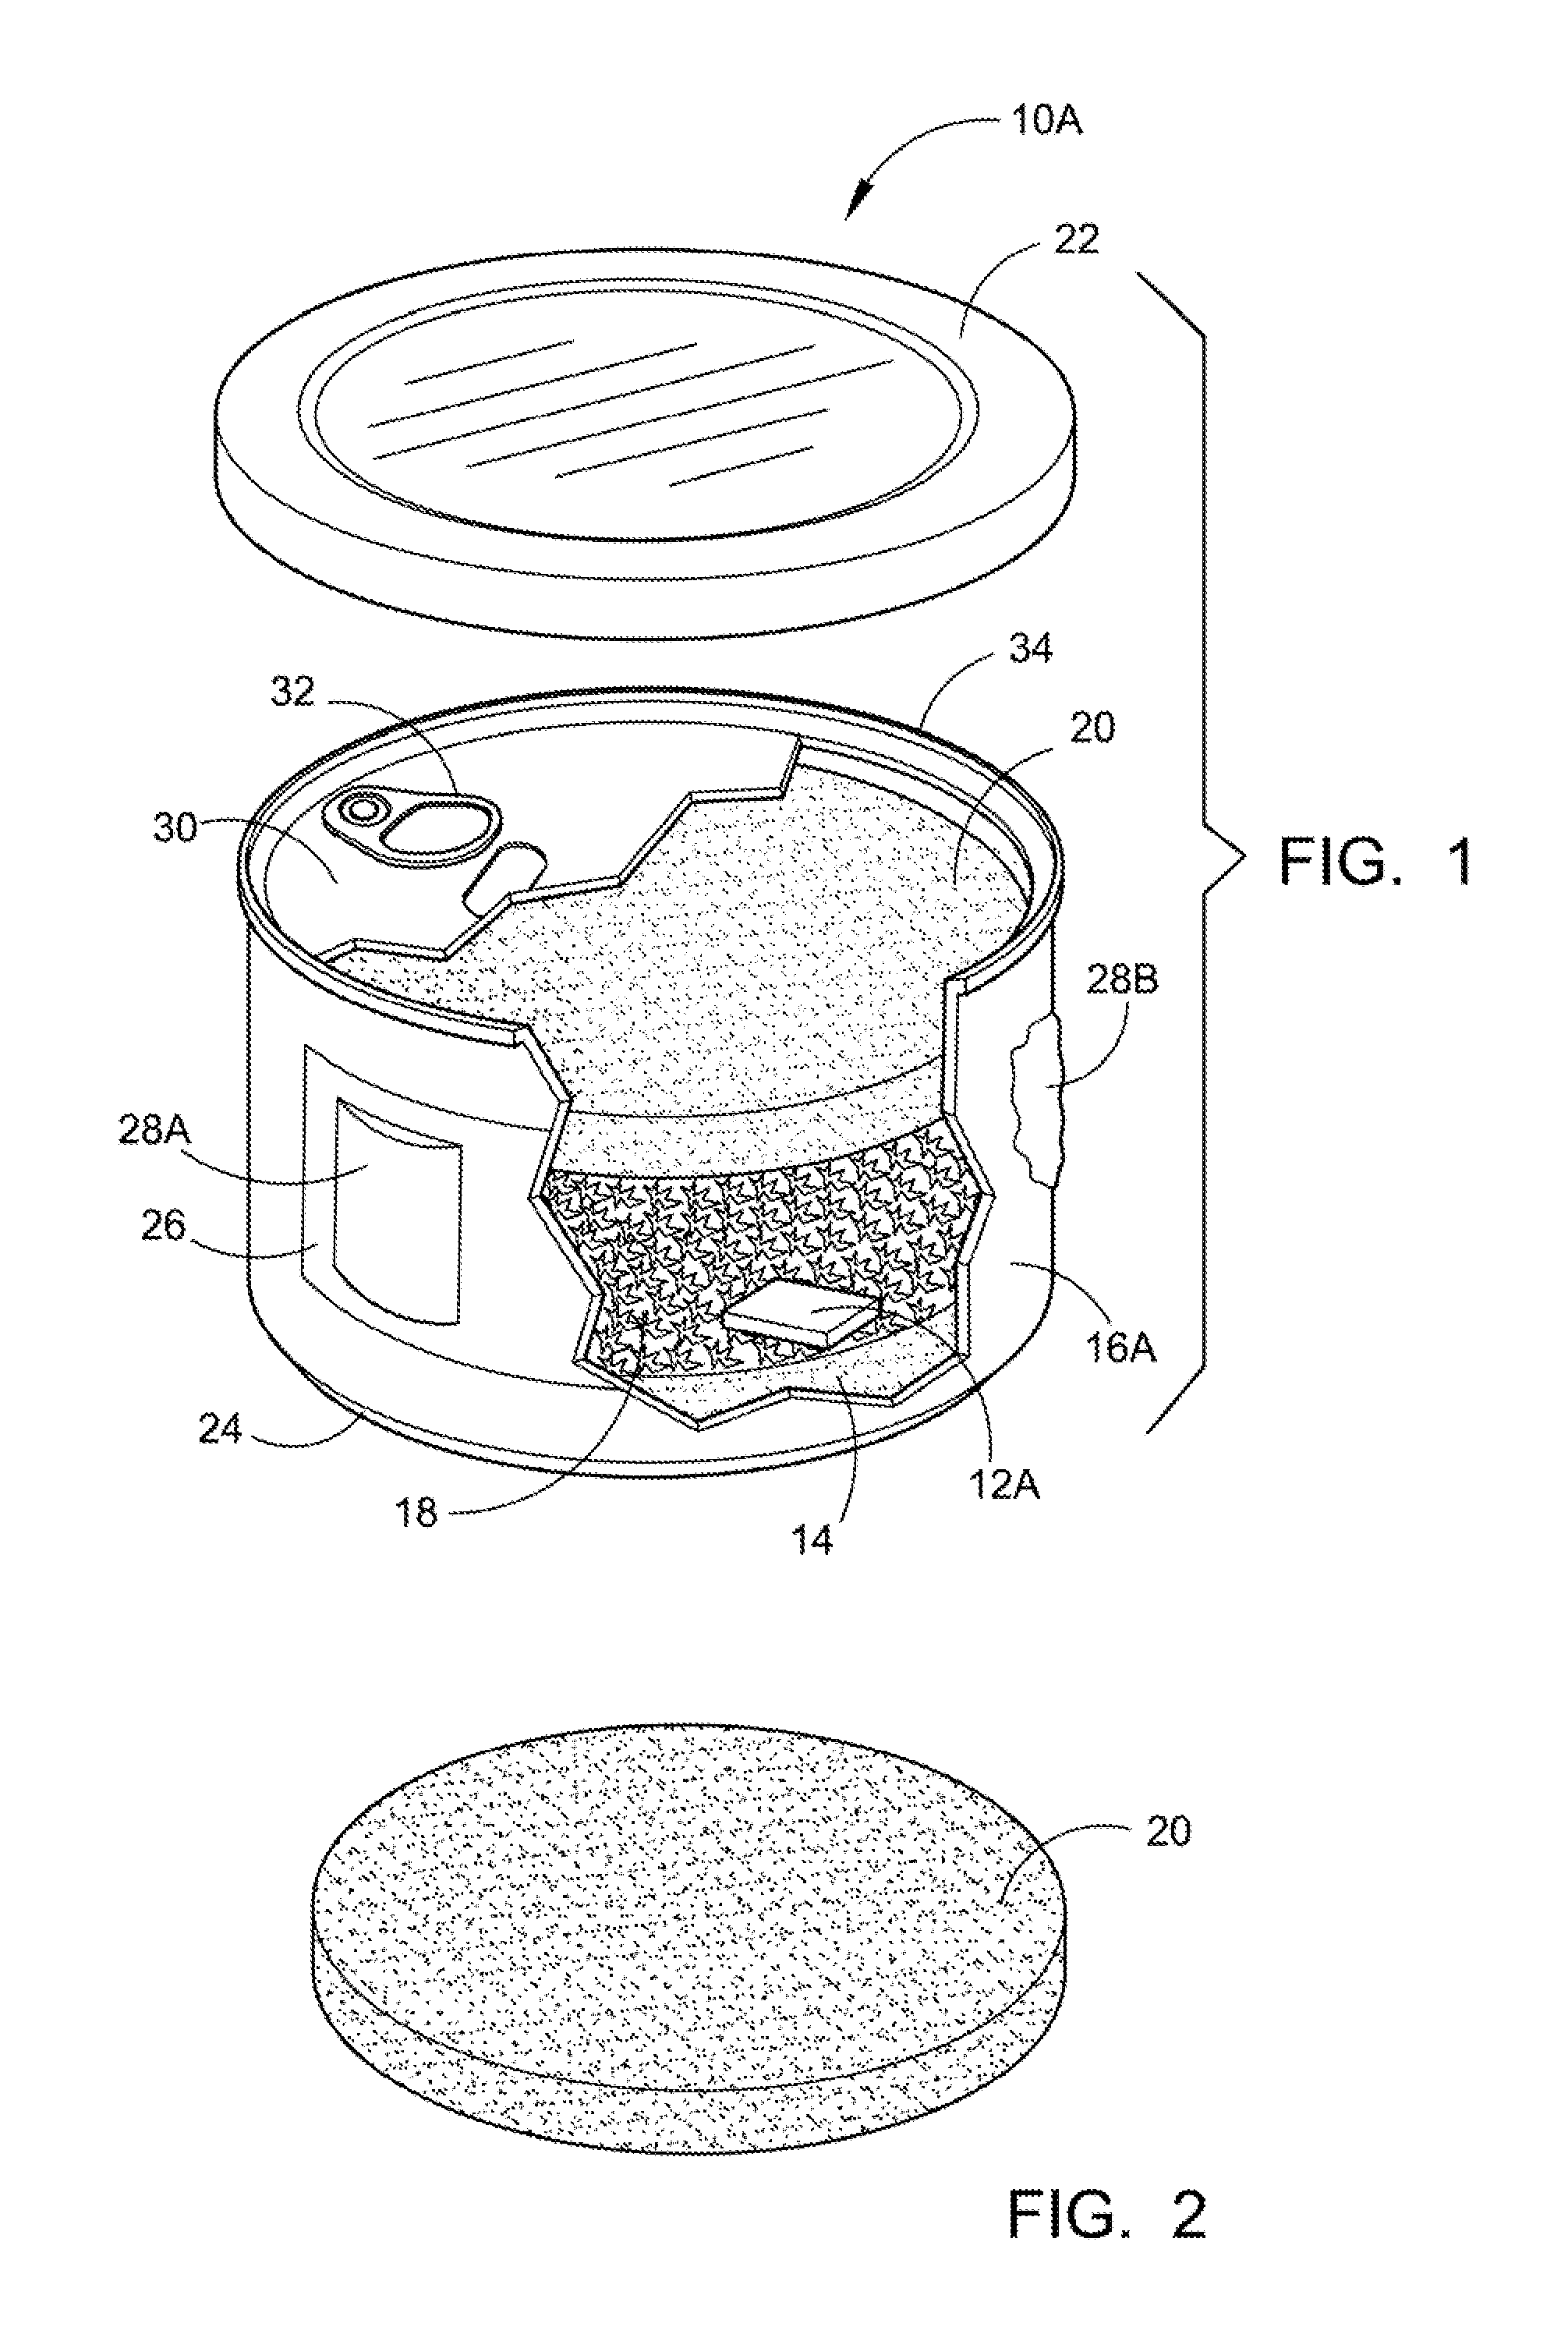 Storage preservation and transport for a controlled substance